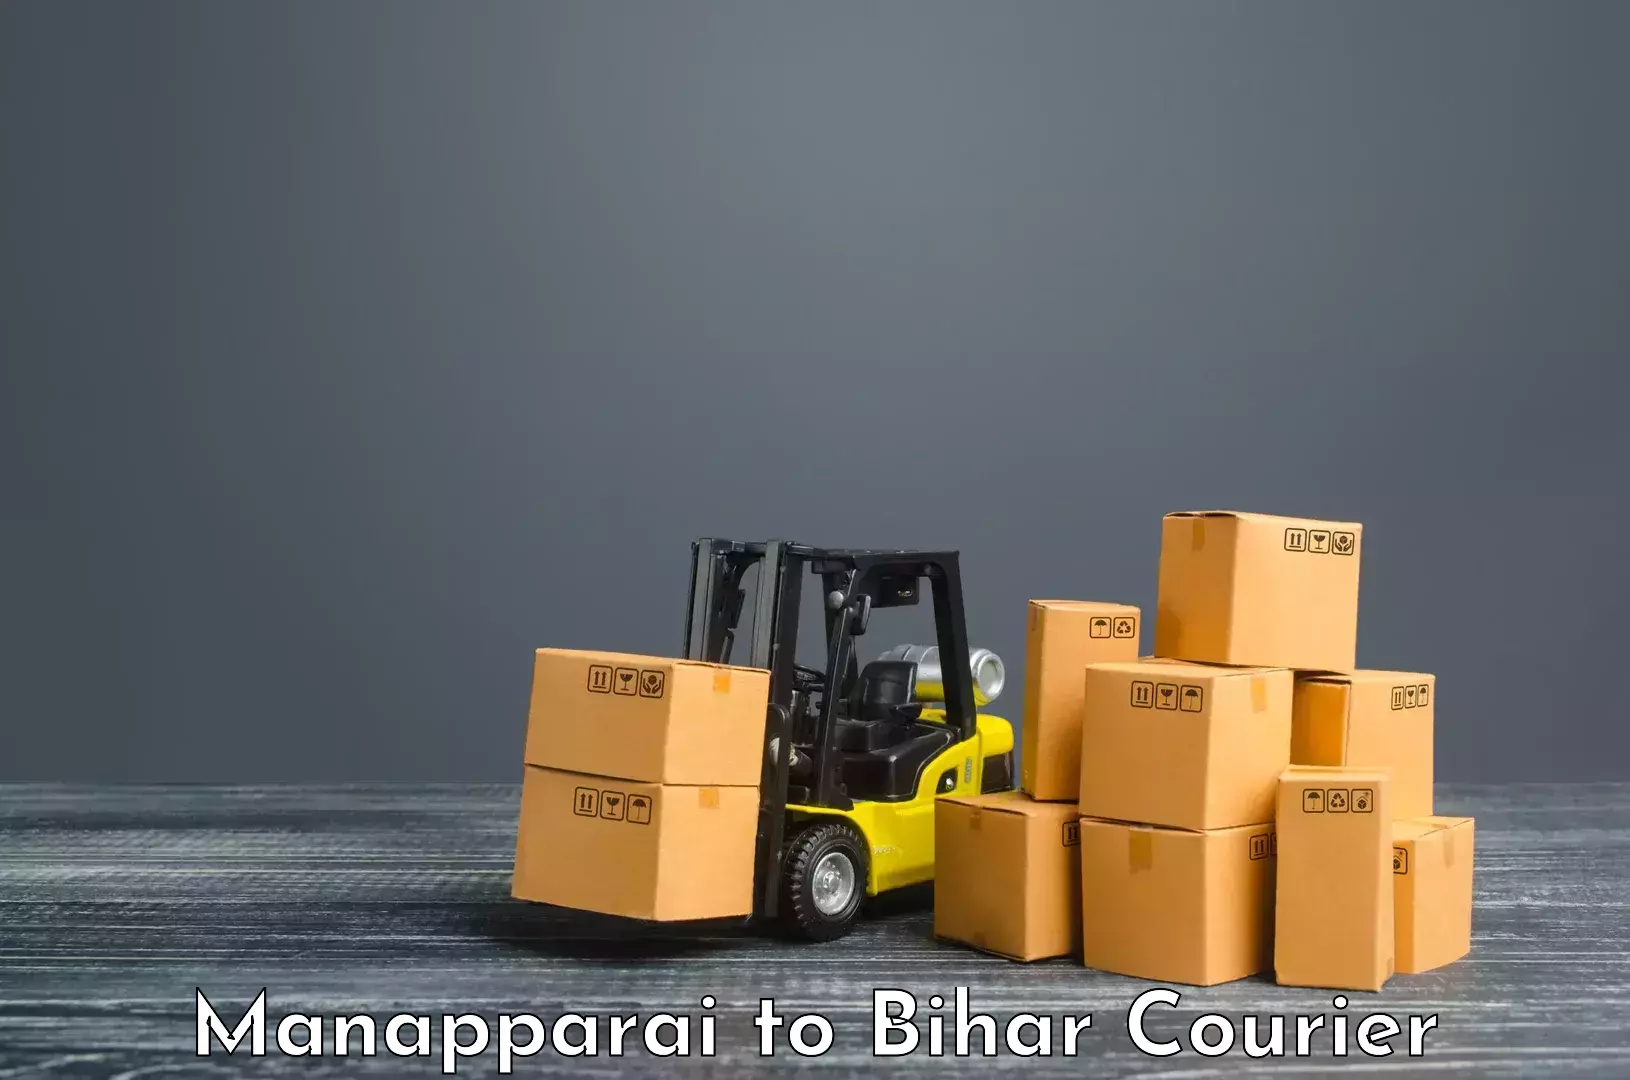 Dynamic courier operations Manapparai to Dehri